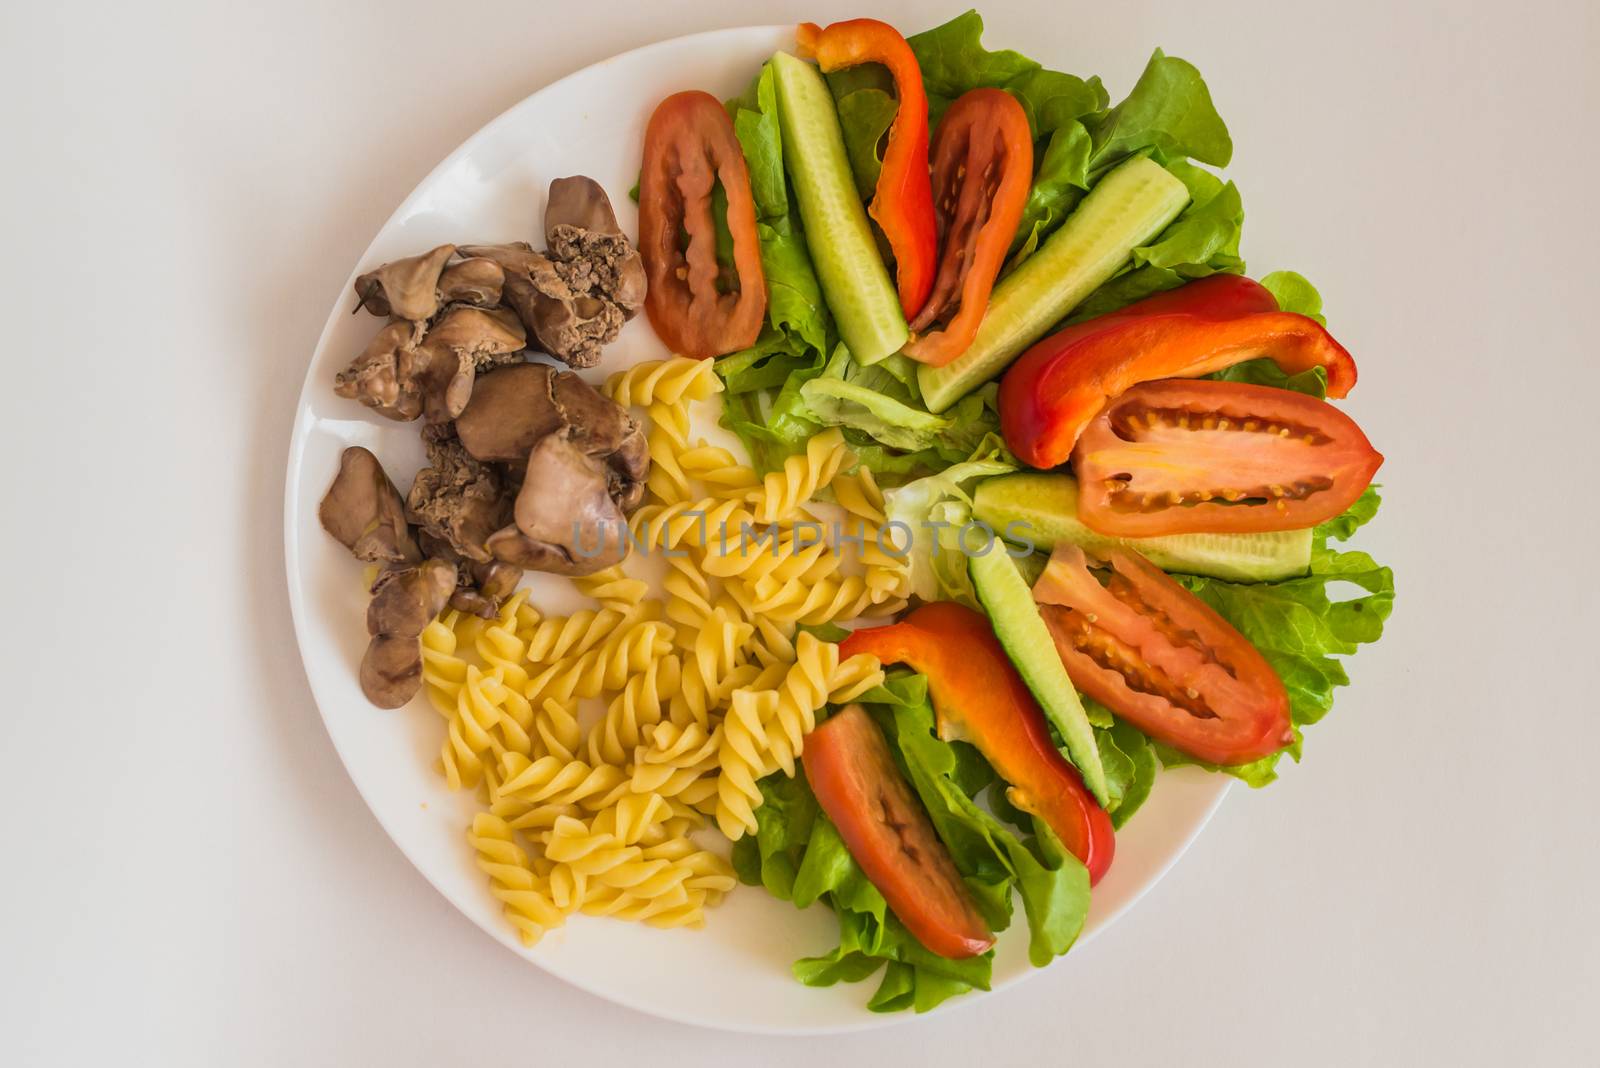 sliced tomatoes, cucumbers, lettuce, boiled pasta and fried chicken liver in the white plate on a white background